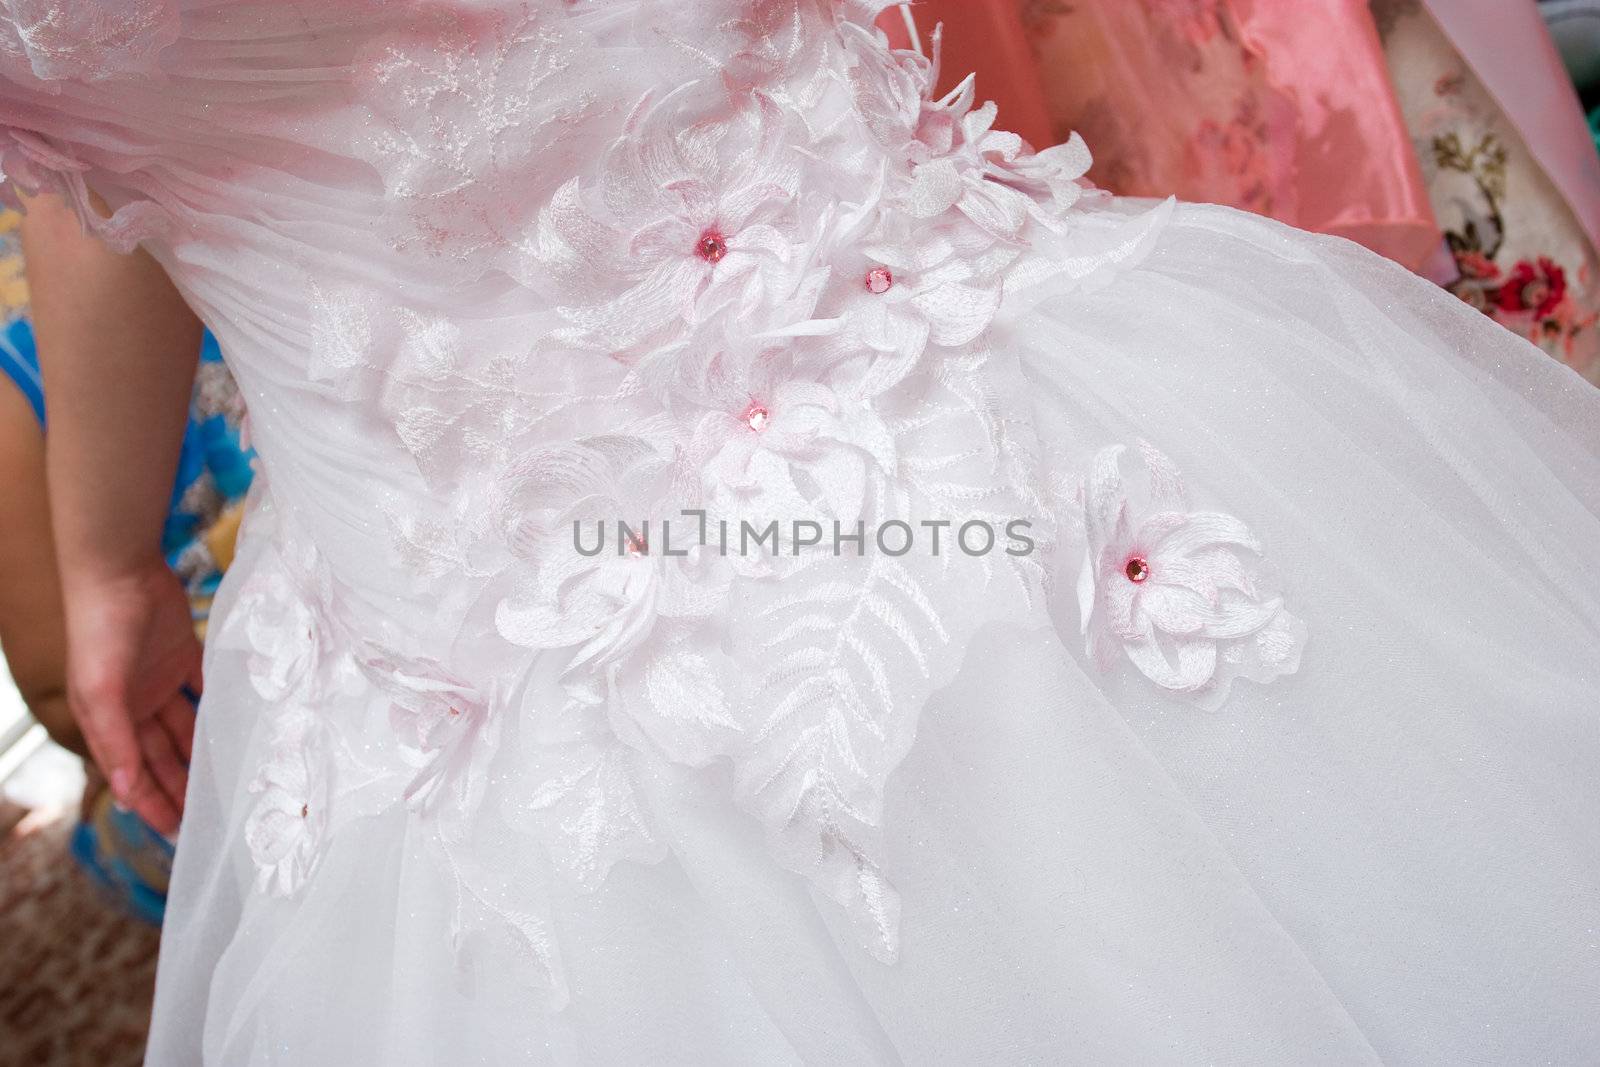 a part of the beautiful dress of the bride